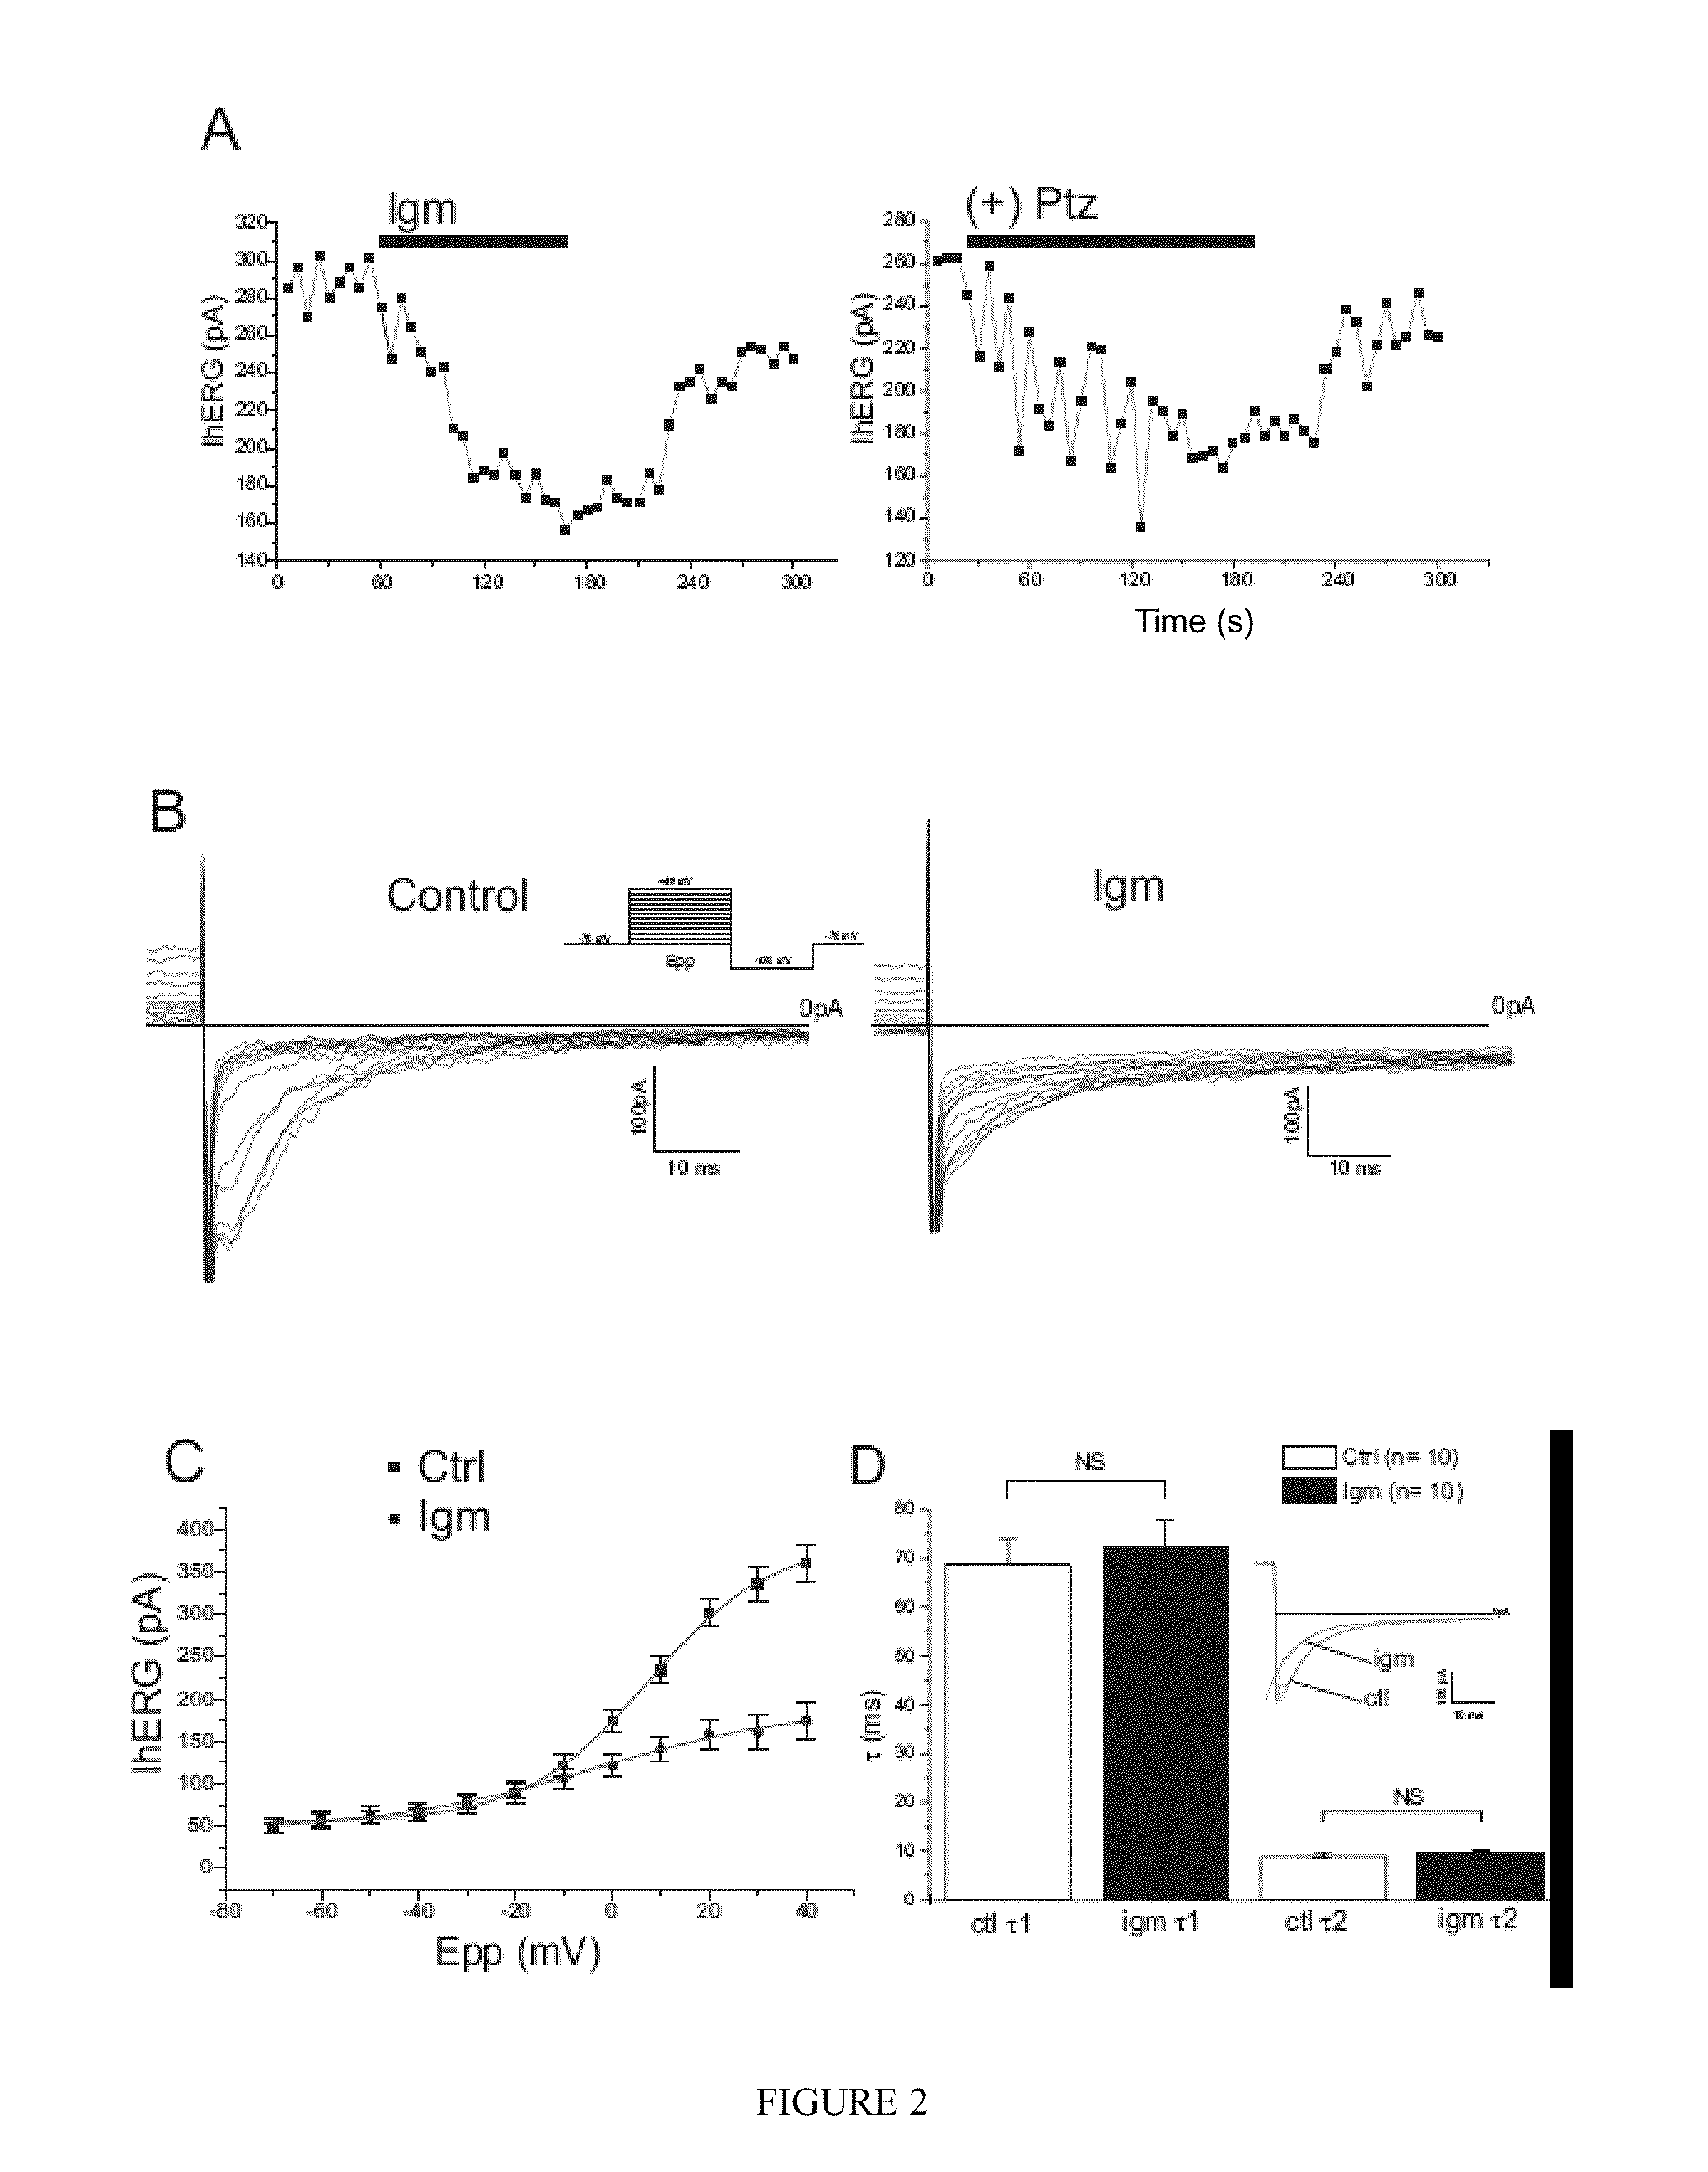 INHIBITORS OF THE INTERACTION OF THE SIGMA-1 RECEPTOR WITH hERG FOR USE IN THE TREATMENT OF CANCER